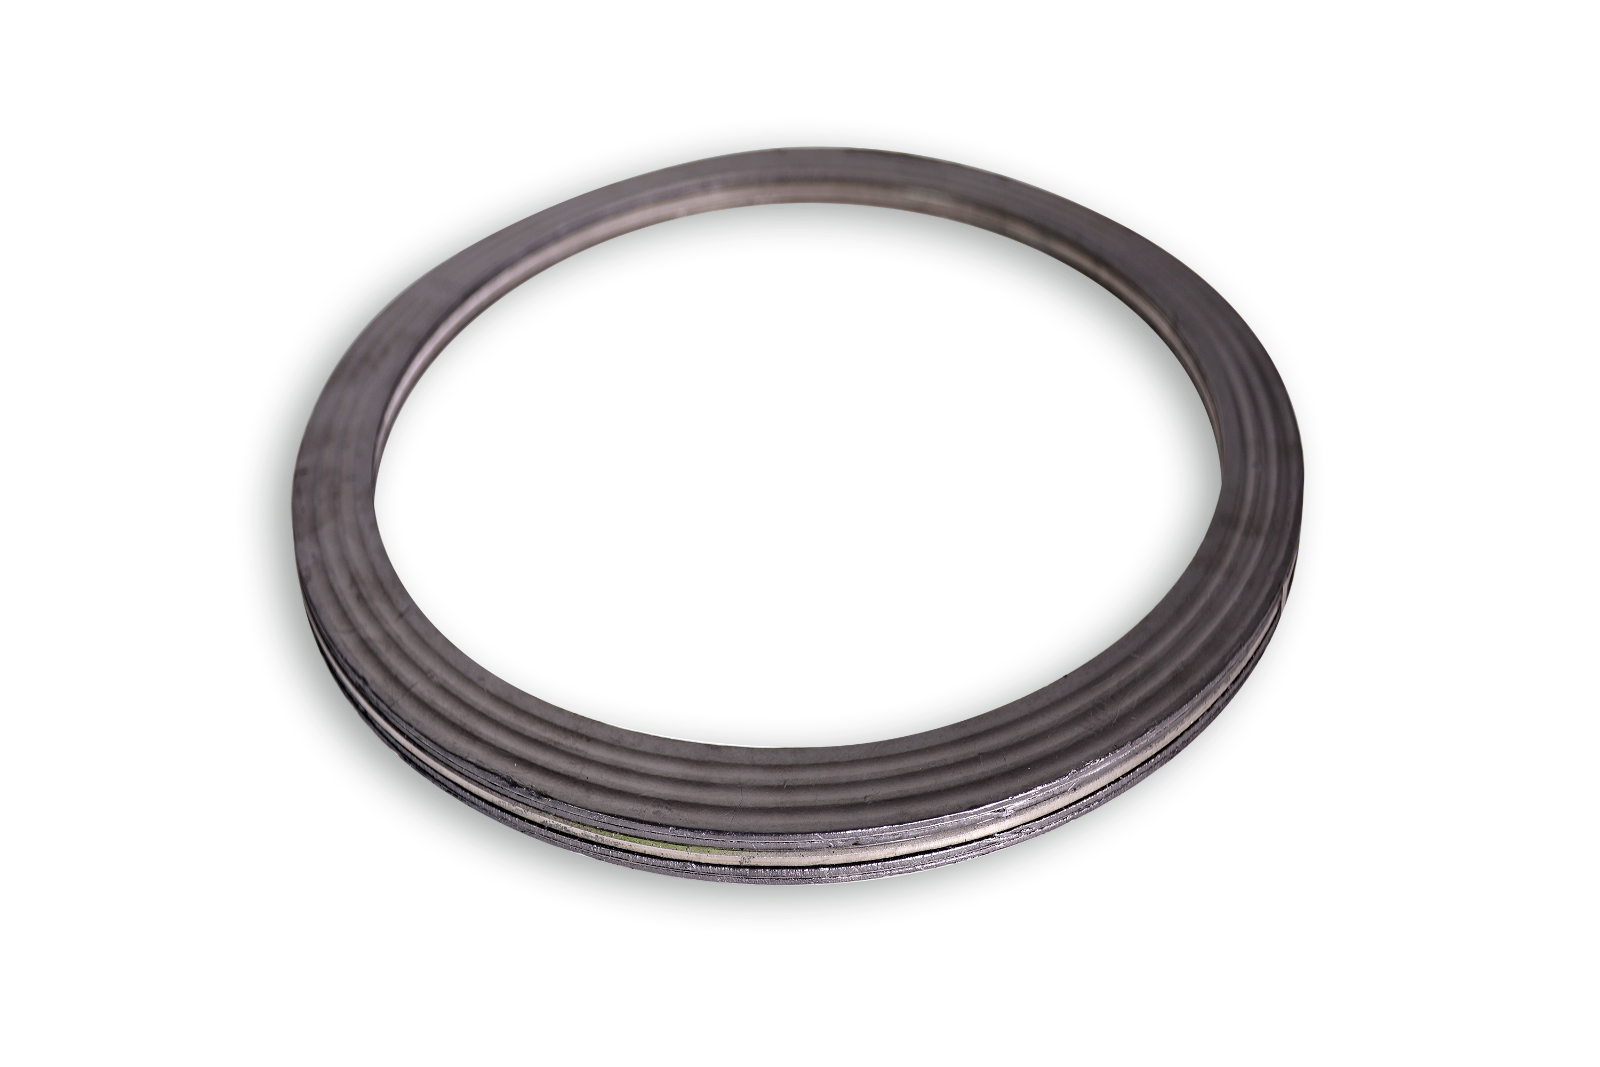 POWERgasket - Seal for non-parallel surfaces